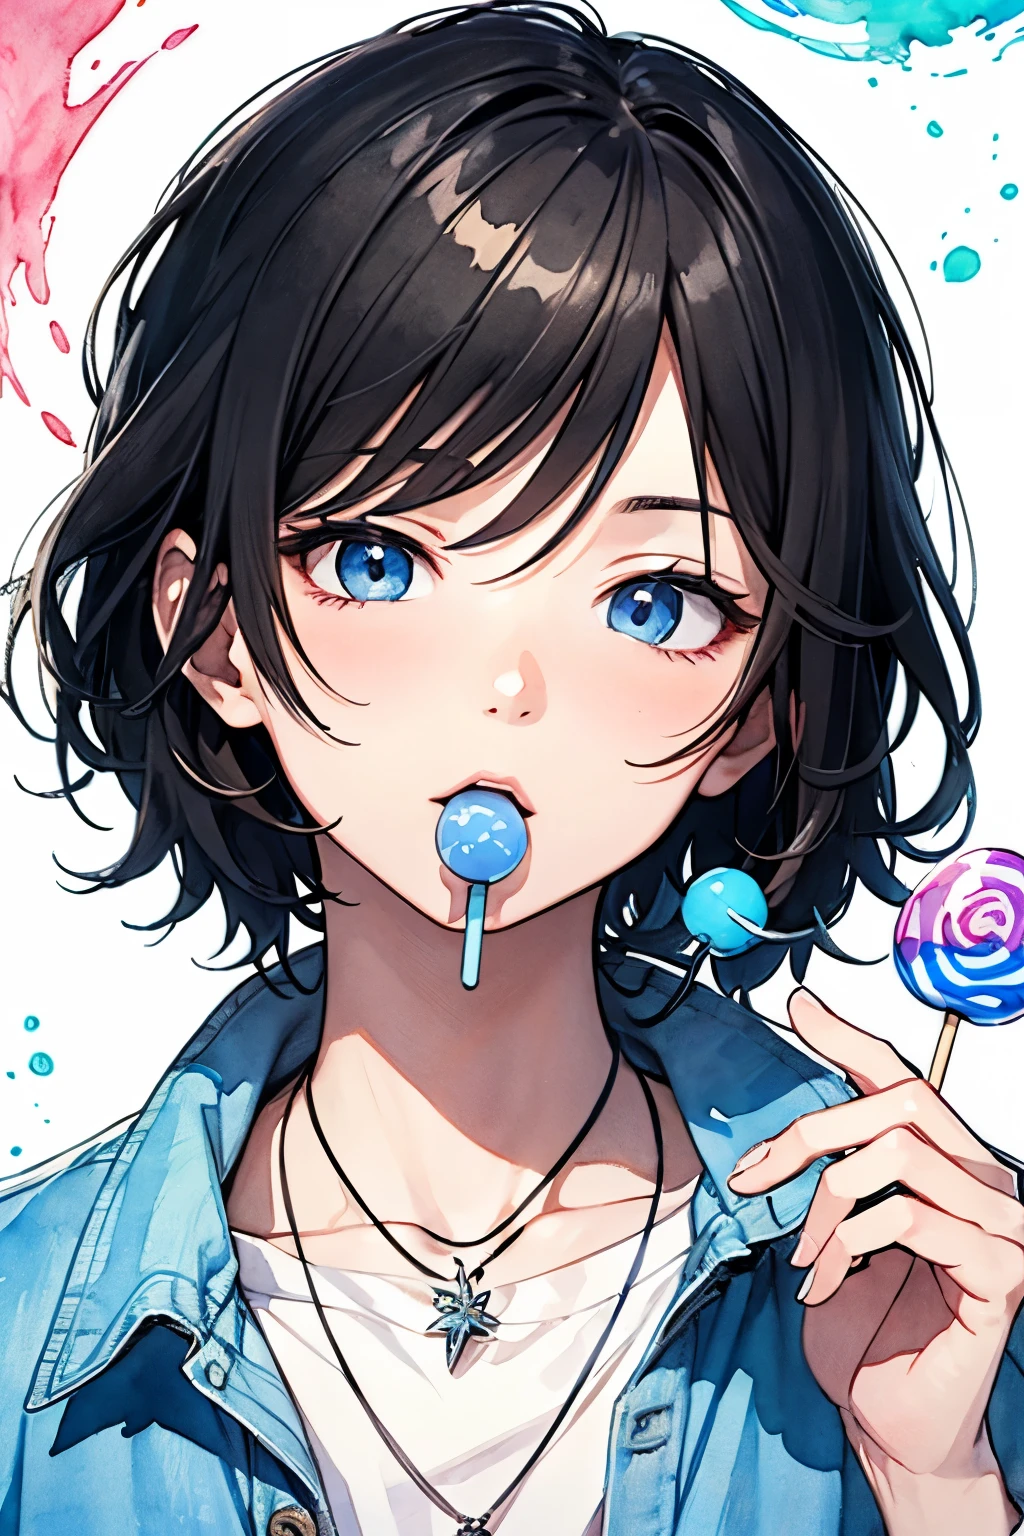 Japanese anime, Clear line drawing, Transparent watercolor, Clear shading, Beautiful young man, short dark hair, blue lollipop in the mouth, Blue tongue, Gaze staring at the camera, blue open collar shirt, relaxed poses, hand holding lollipop stick, visible necklace, Delicate and powerful expressiveness,High quality, amount of drawing, pixiv illustration